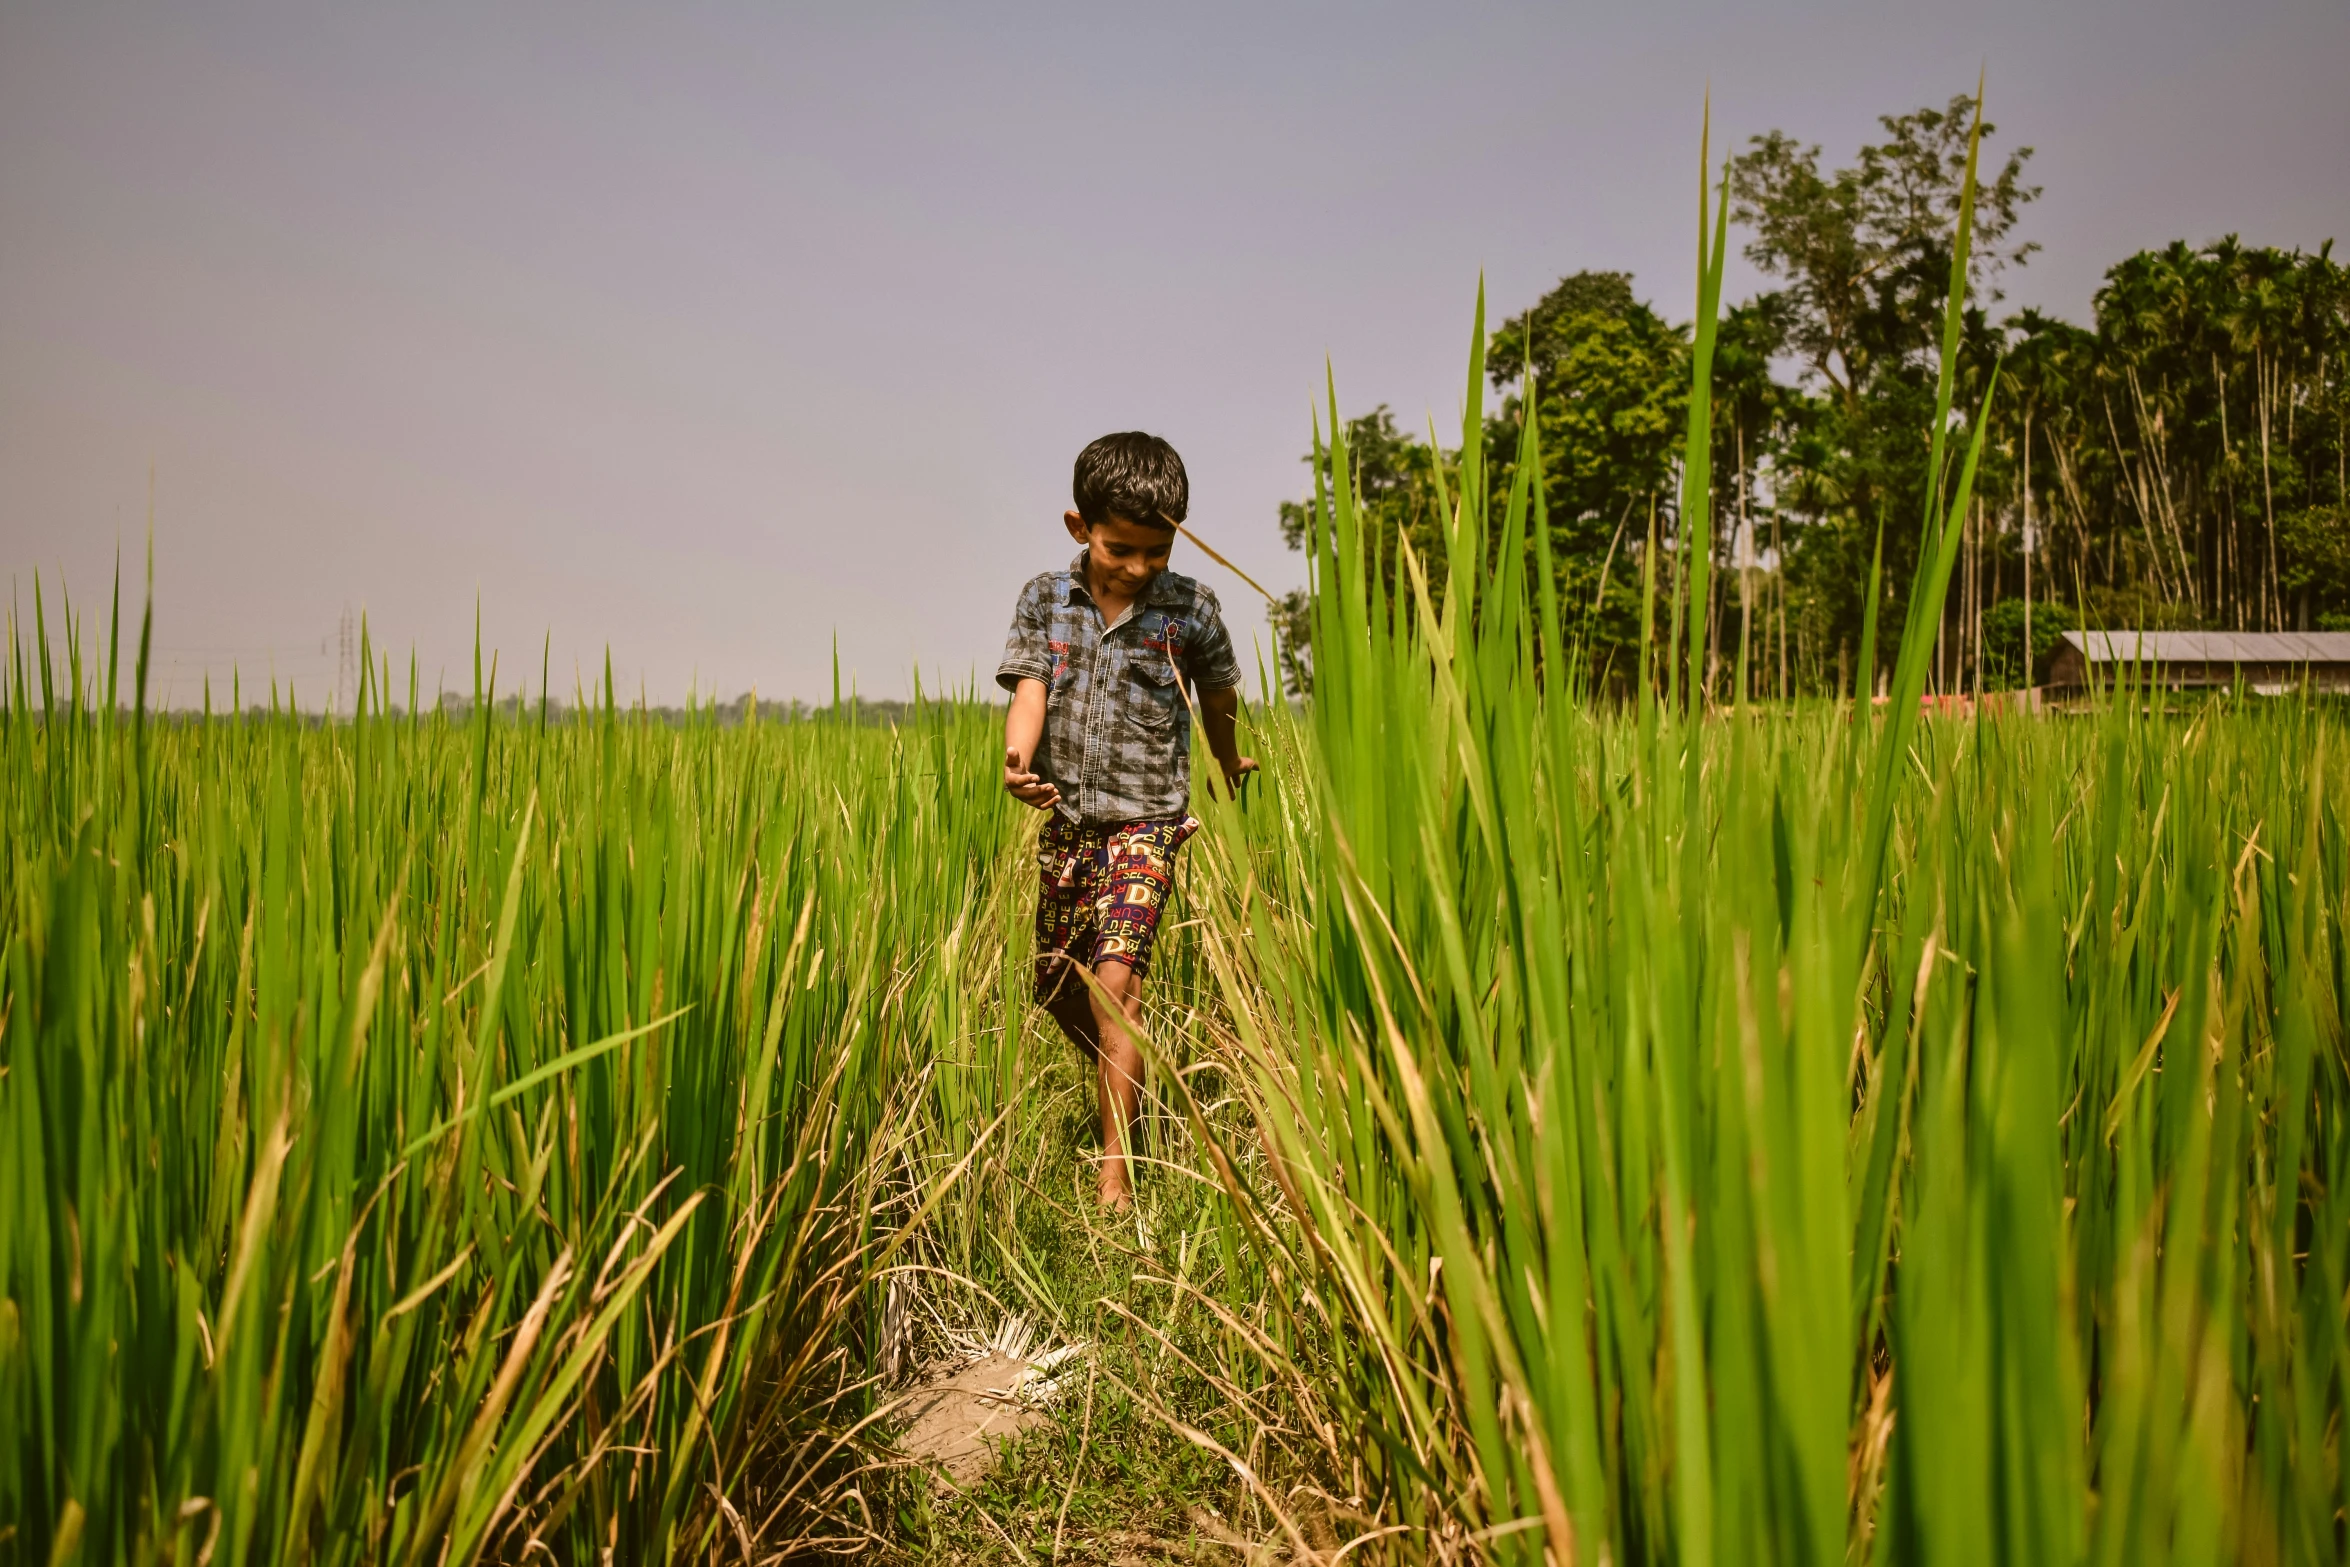 a young child walking through tall grass near trees